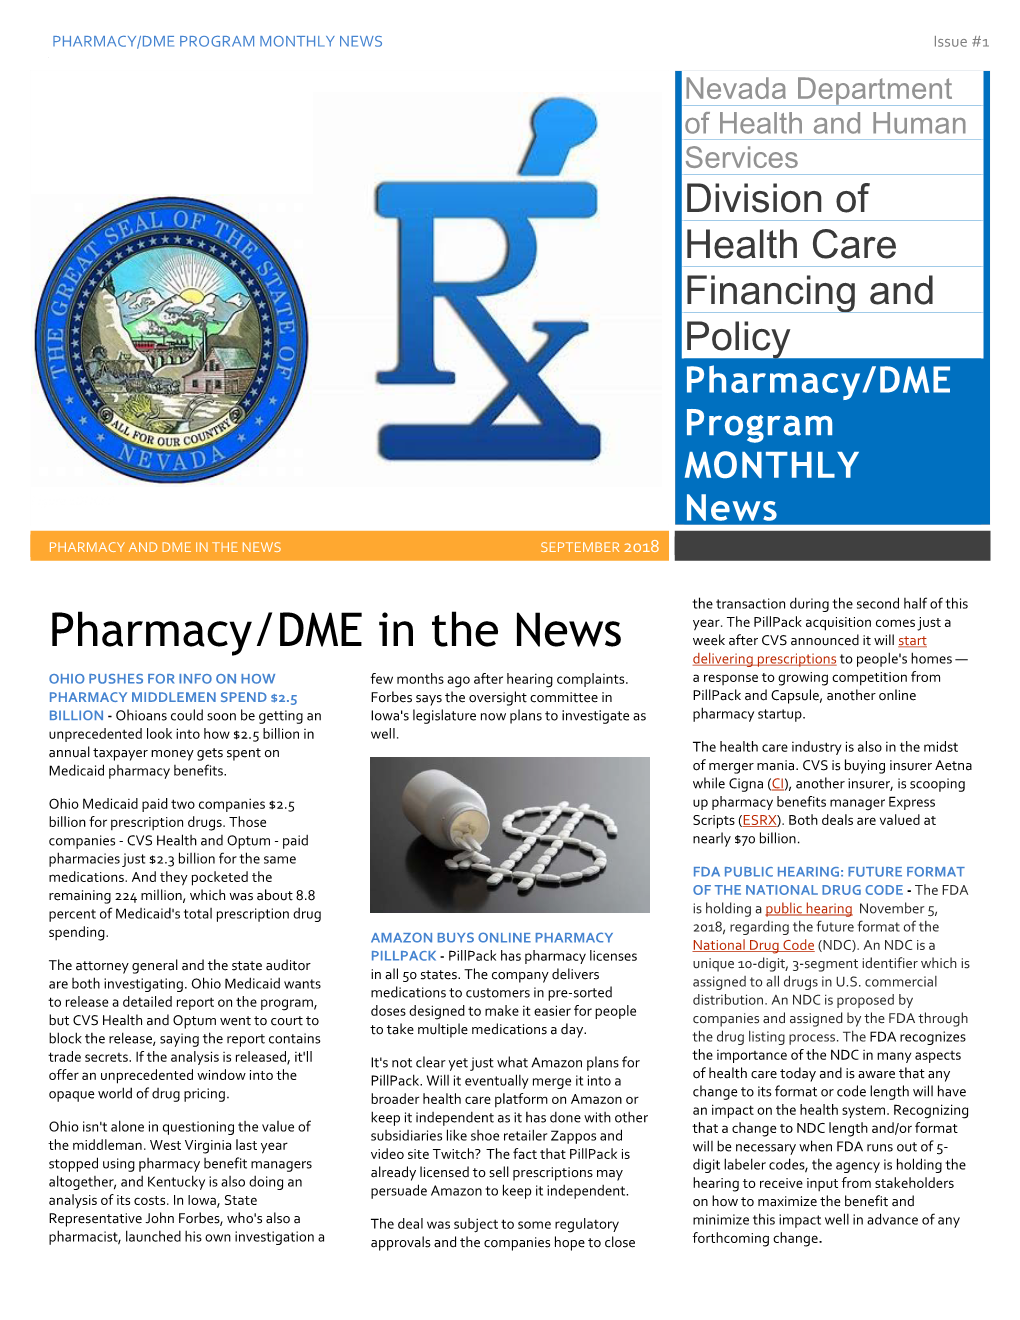 Pharmacy/DME in the News